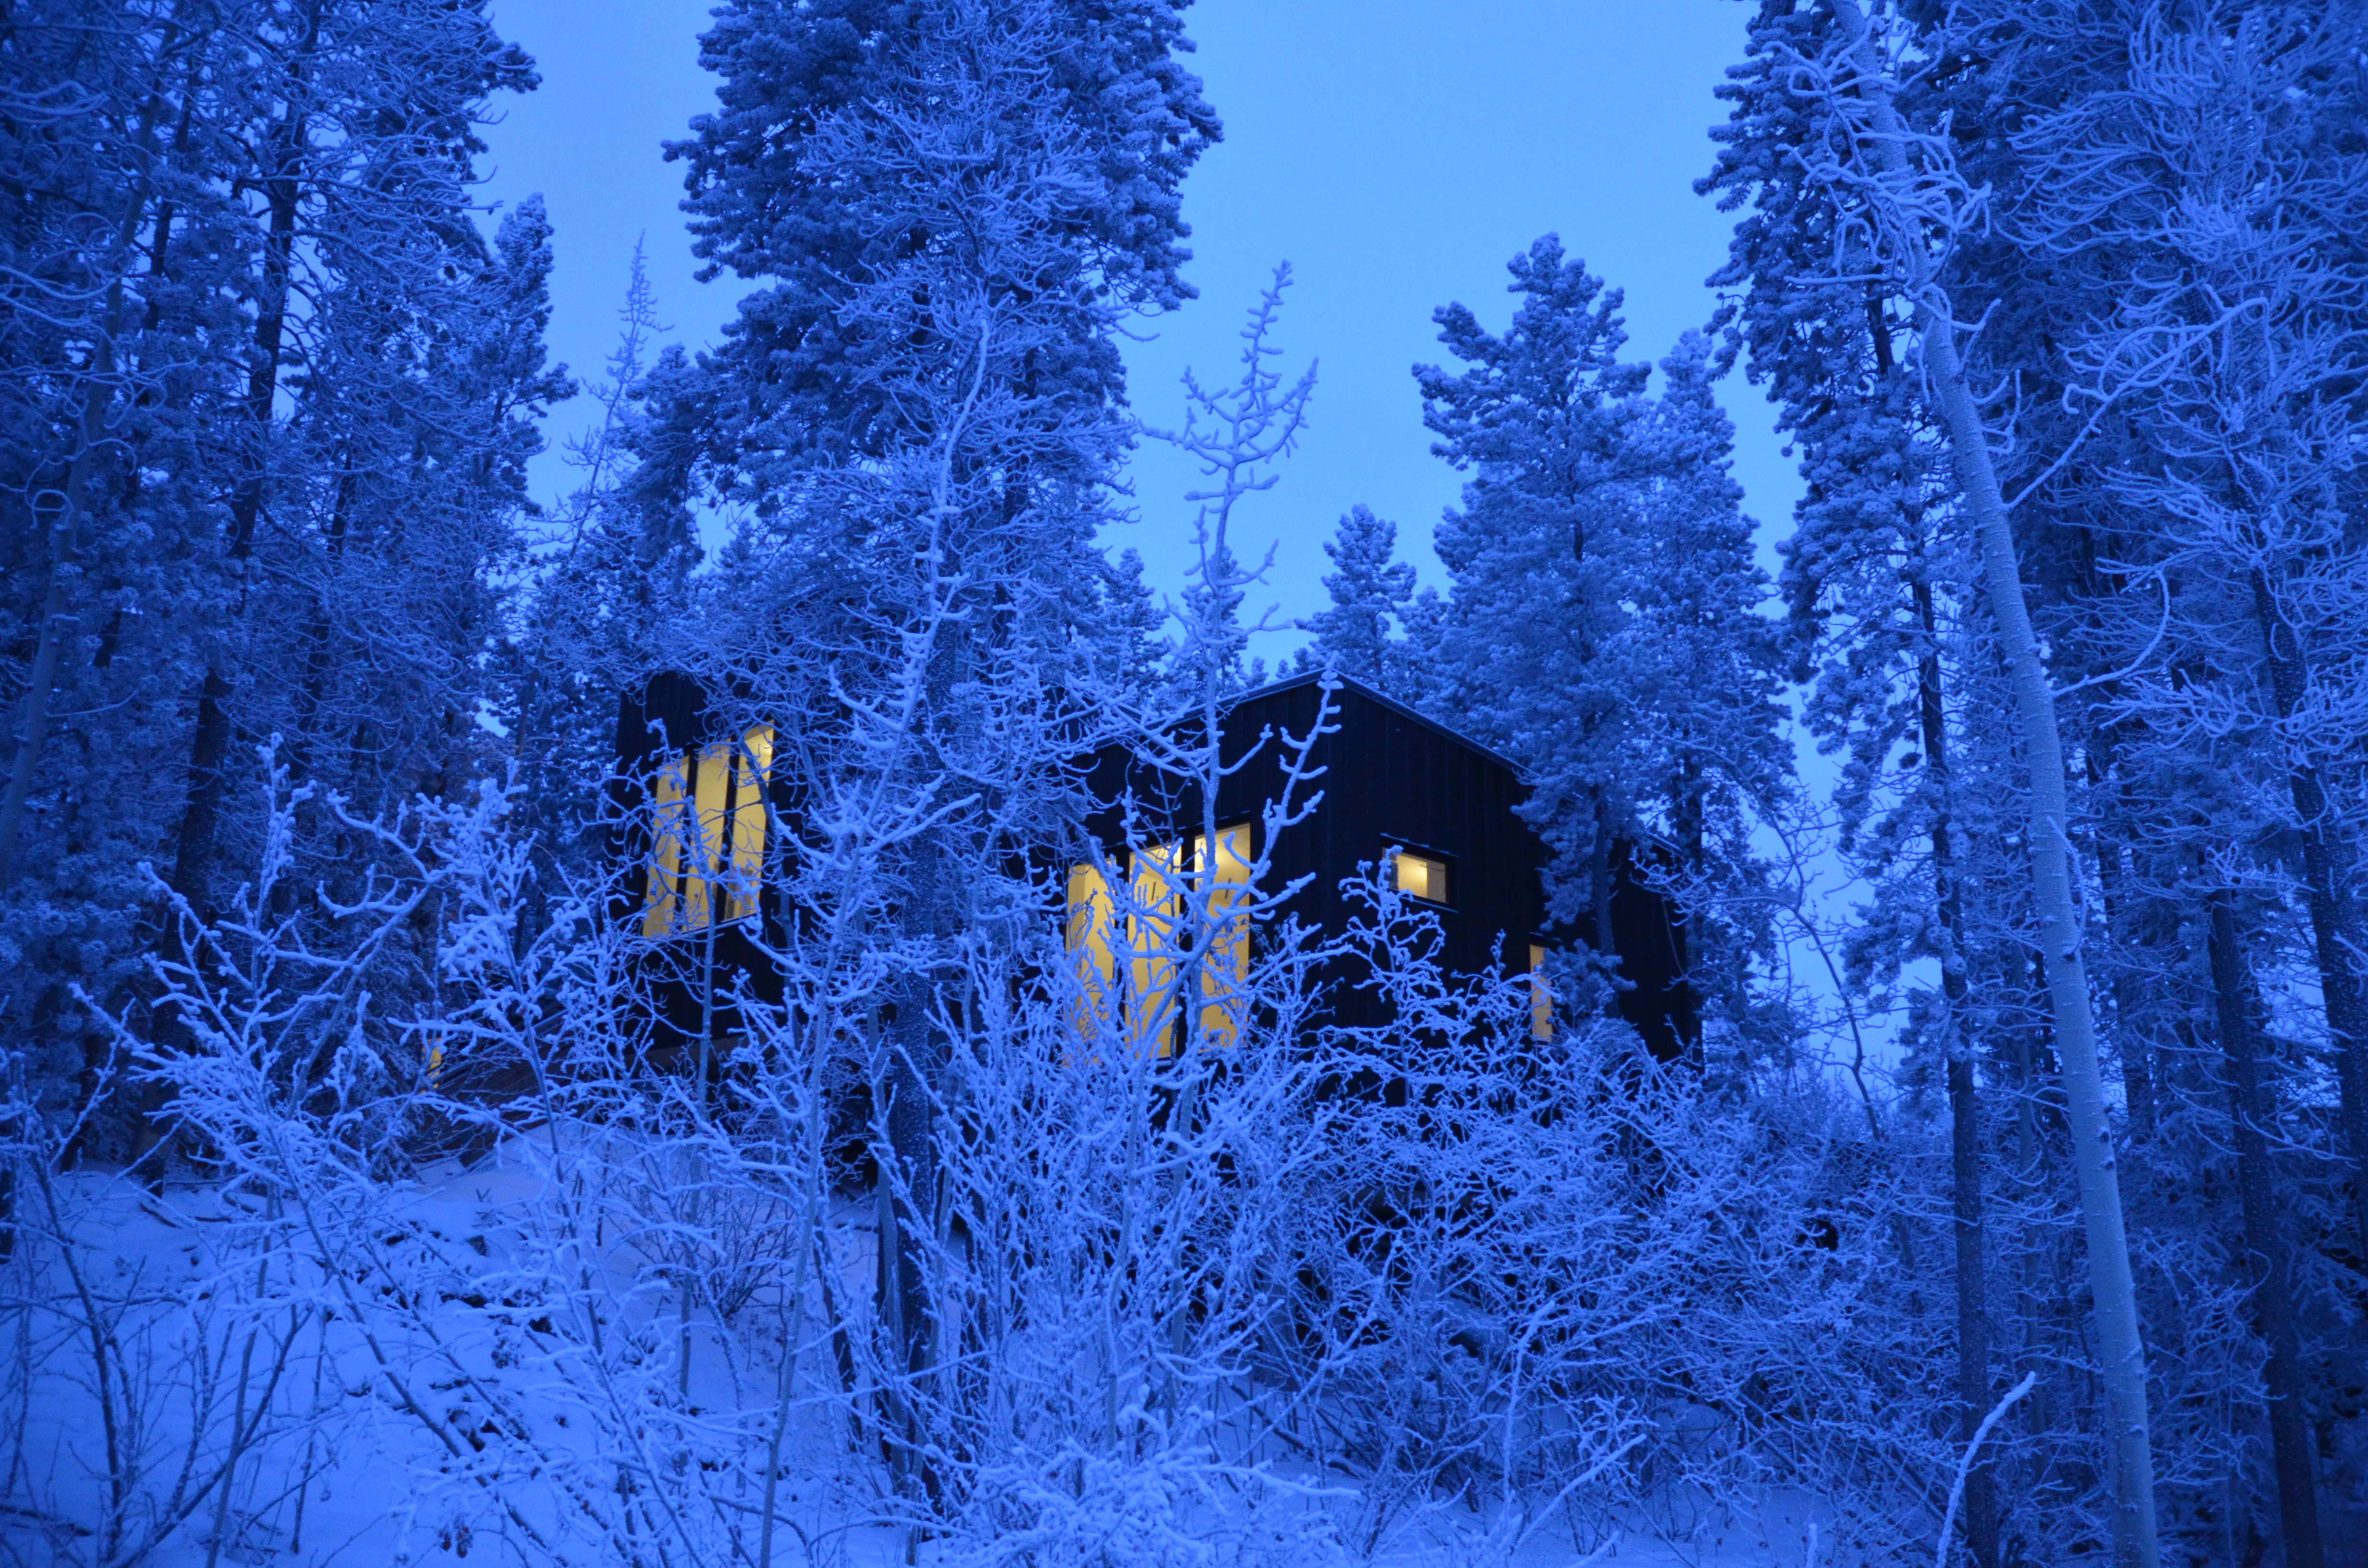 An off-the-grid cabin nestled in the winter forest at nighttime. 